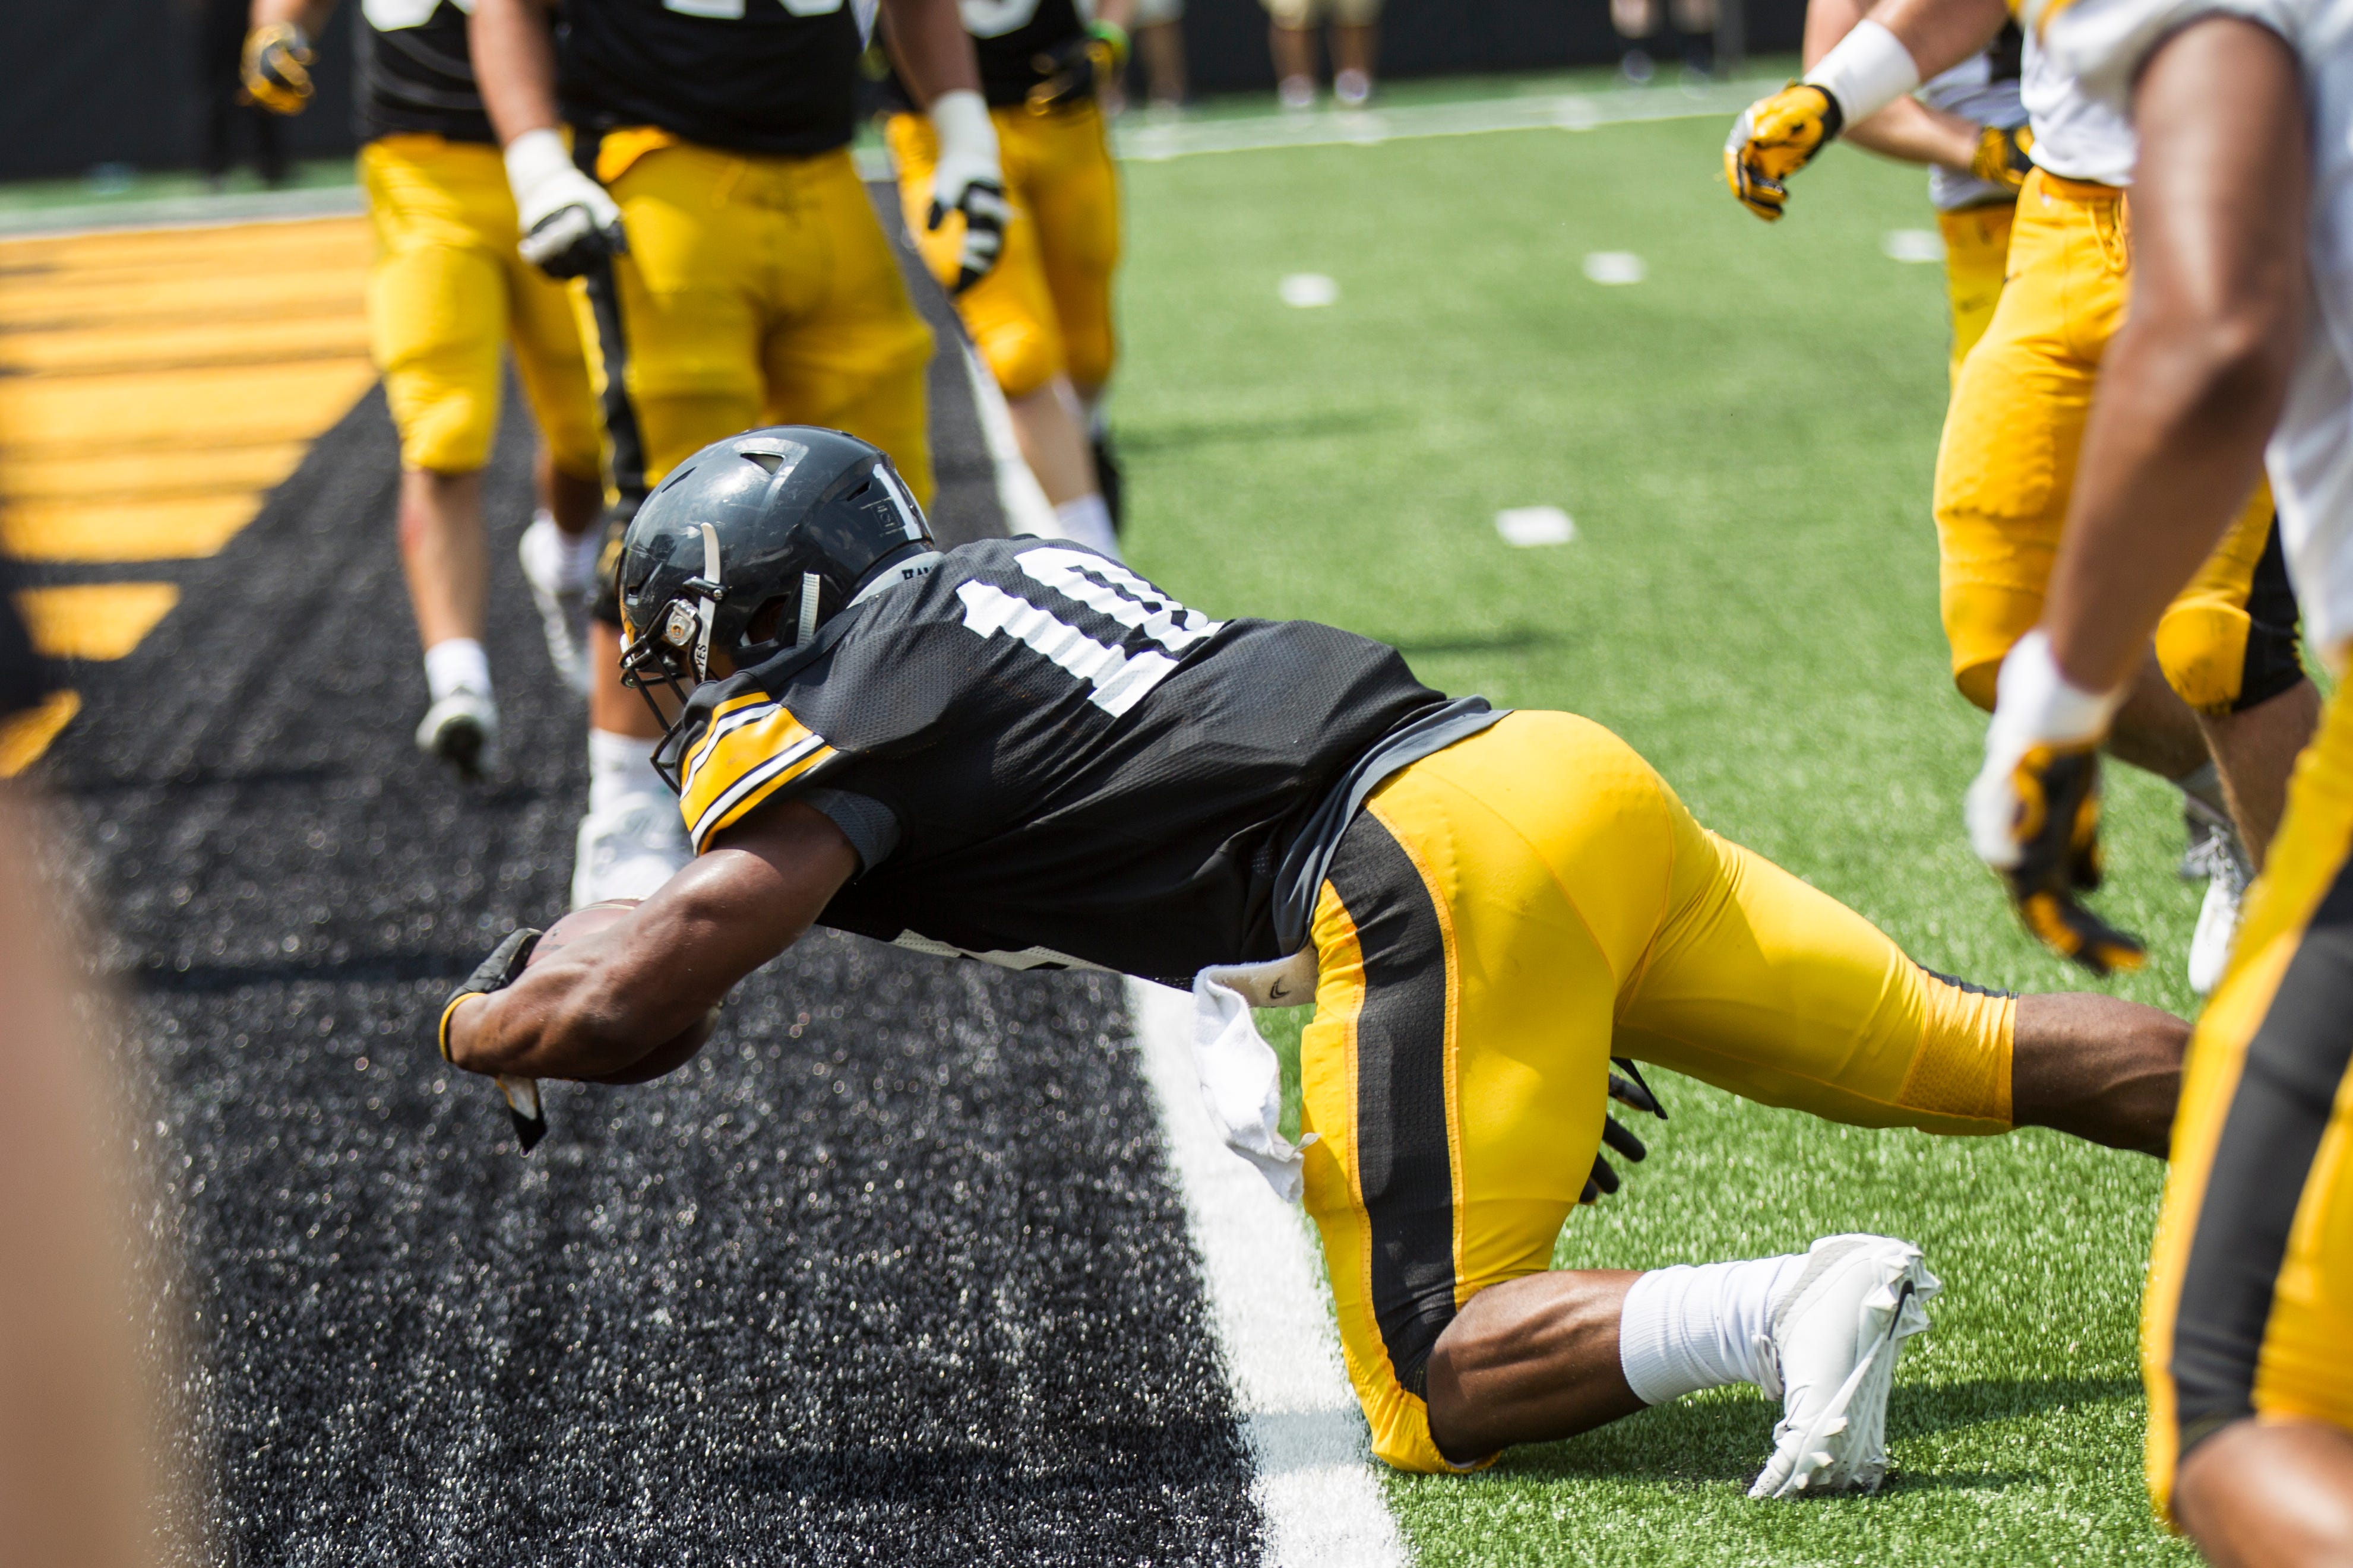 Iowa running back Mekhi Sargent dives into the end zone for a touchdown during a Kids Day practice on Saturday, Aug. 11, 2018, at Kinnick Stadium in Iowa City.